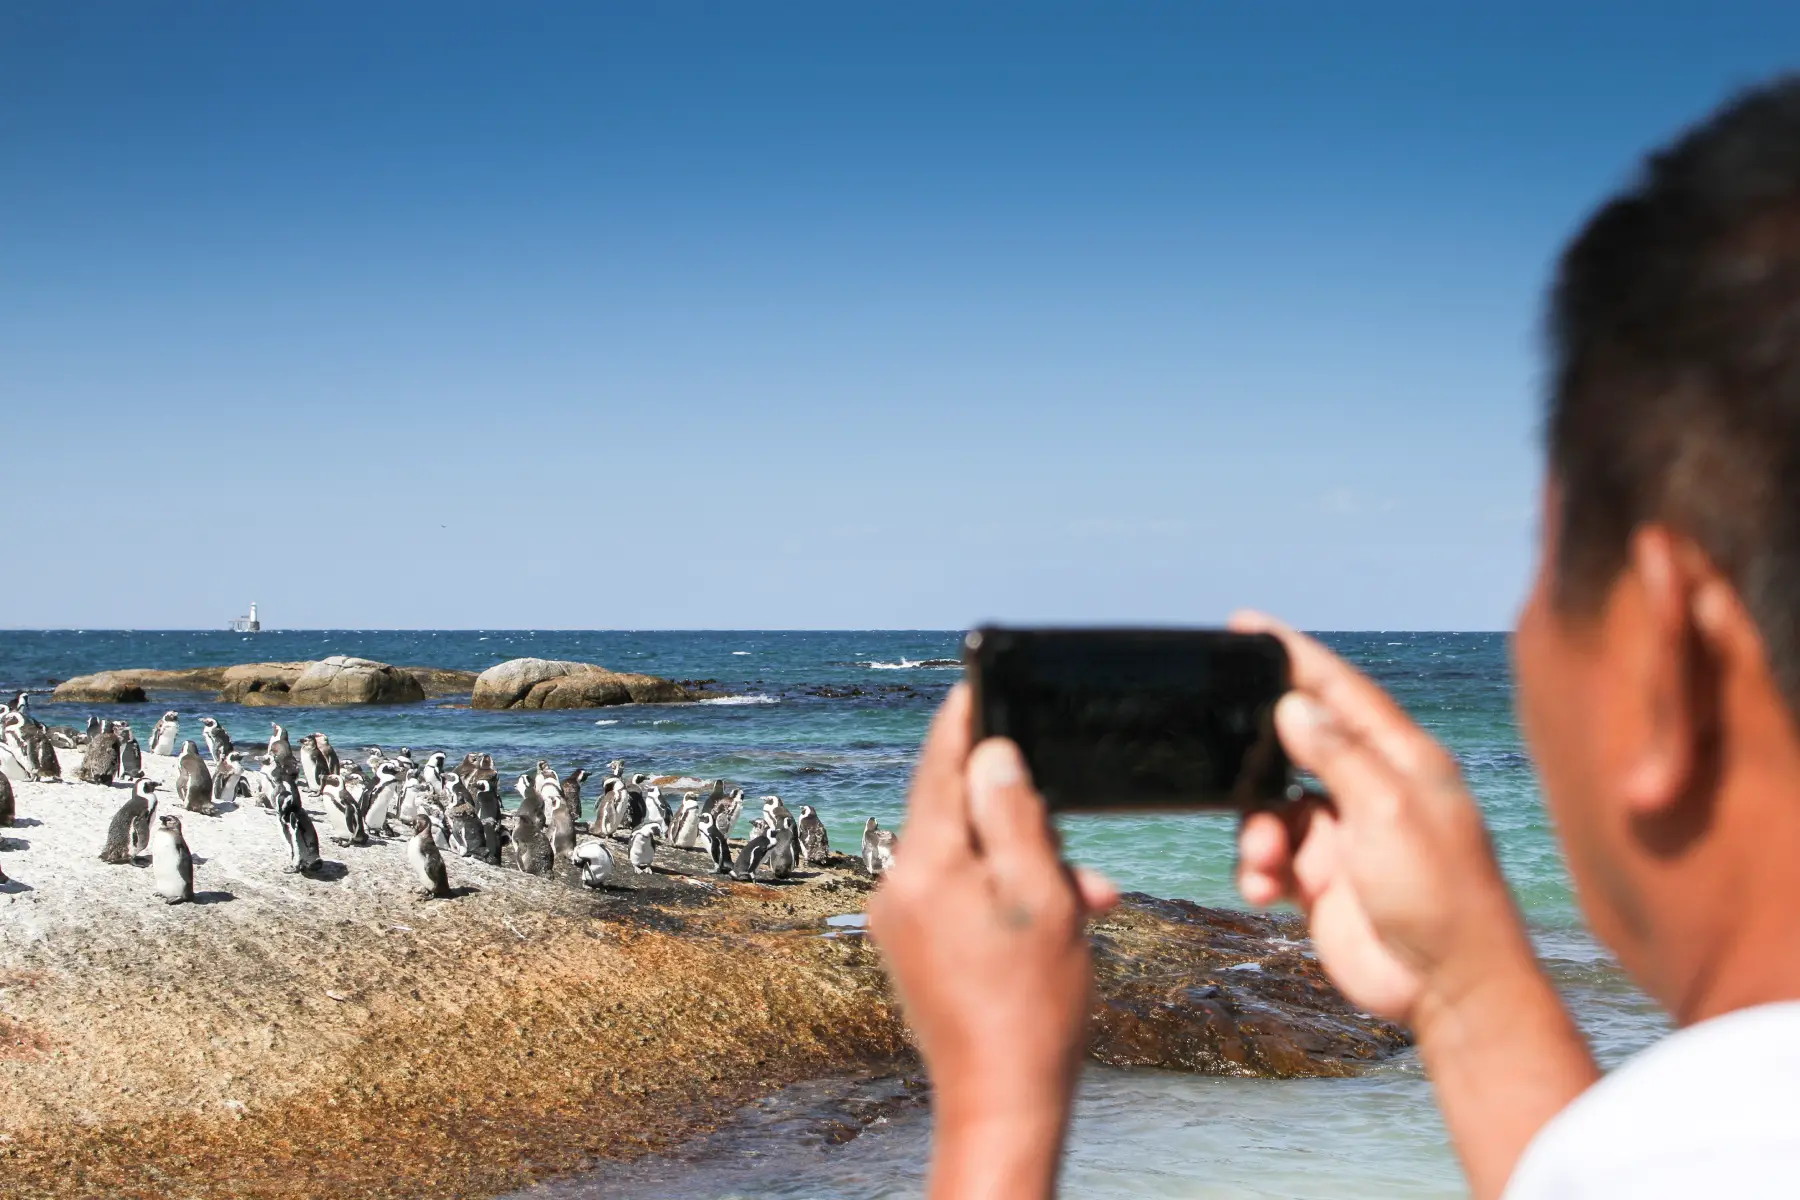 Tourist taking photos on mobile phone of penguins